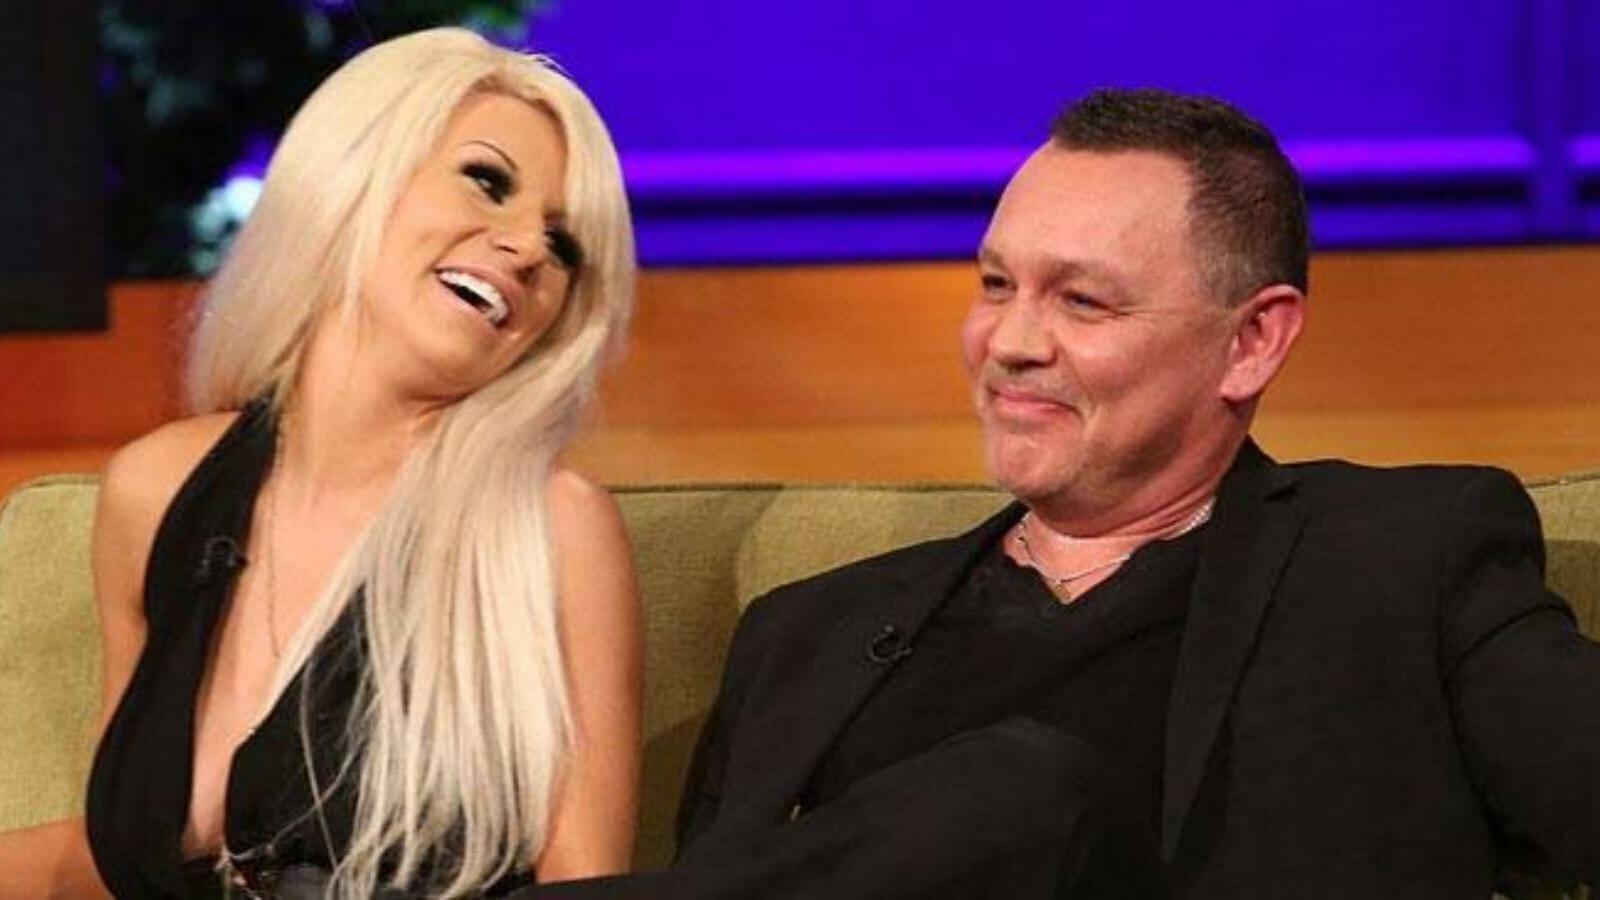 Courtney Stodden opens up about Doug Hutchinson's abusive behavior